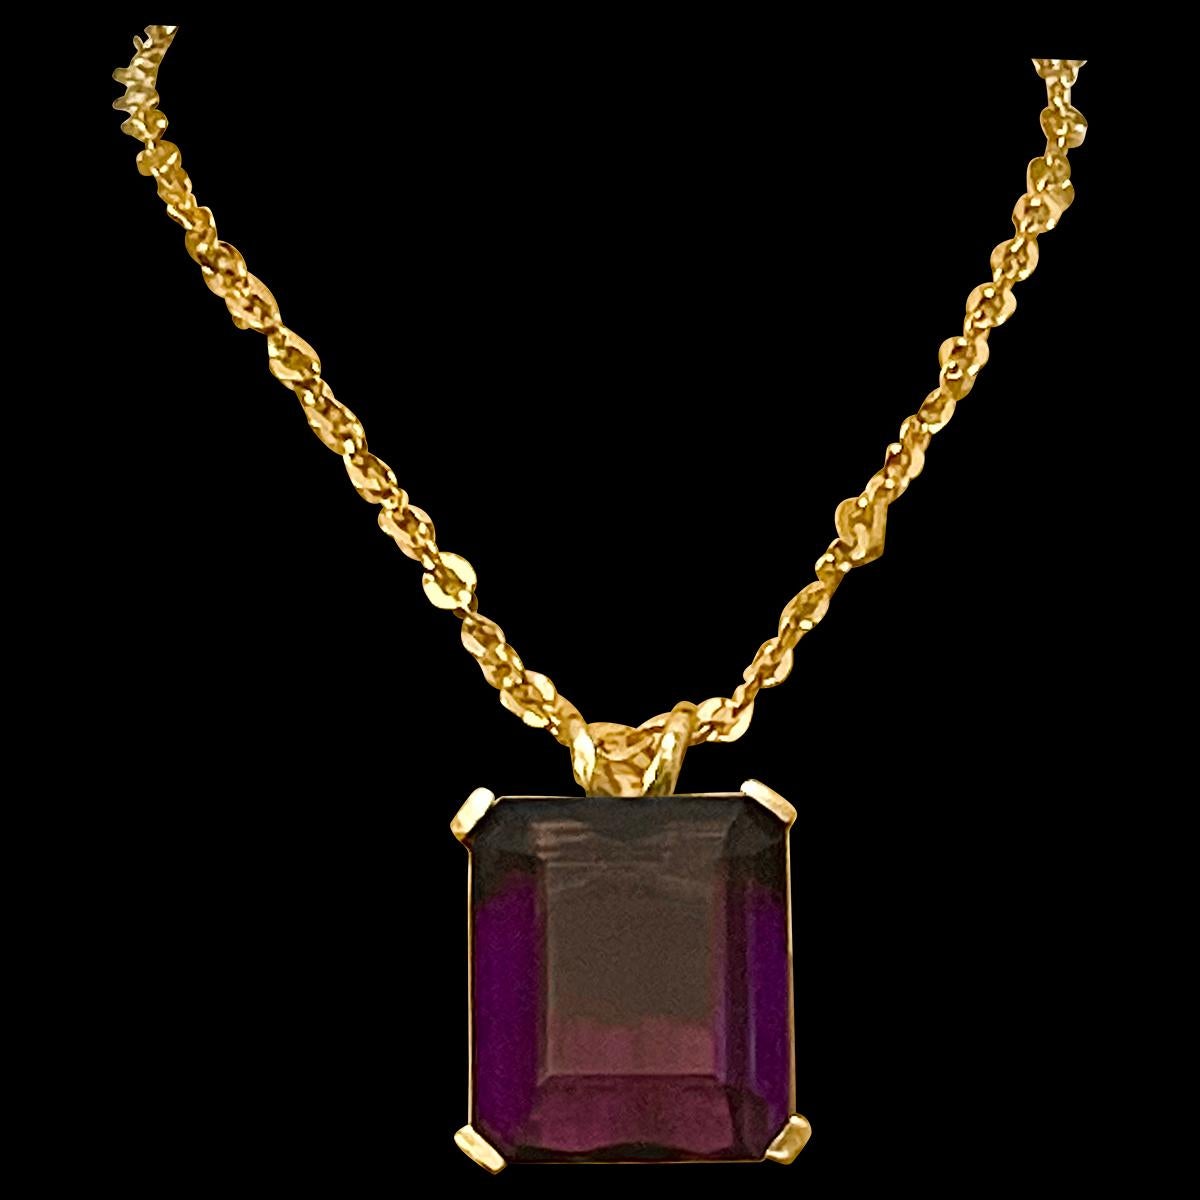 42 Ct Emerald Cut Amethyst Pendant /Necklace + 14 Kt Yellow Gold Chain Vintage 11